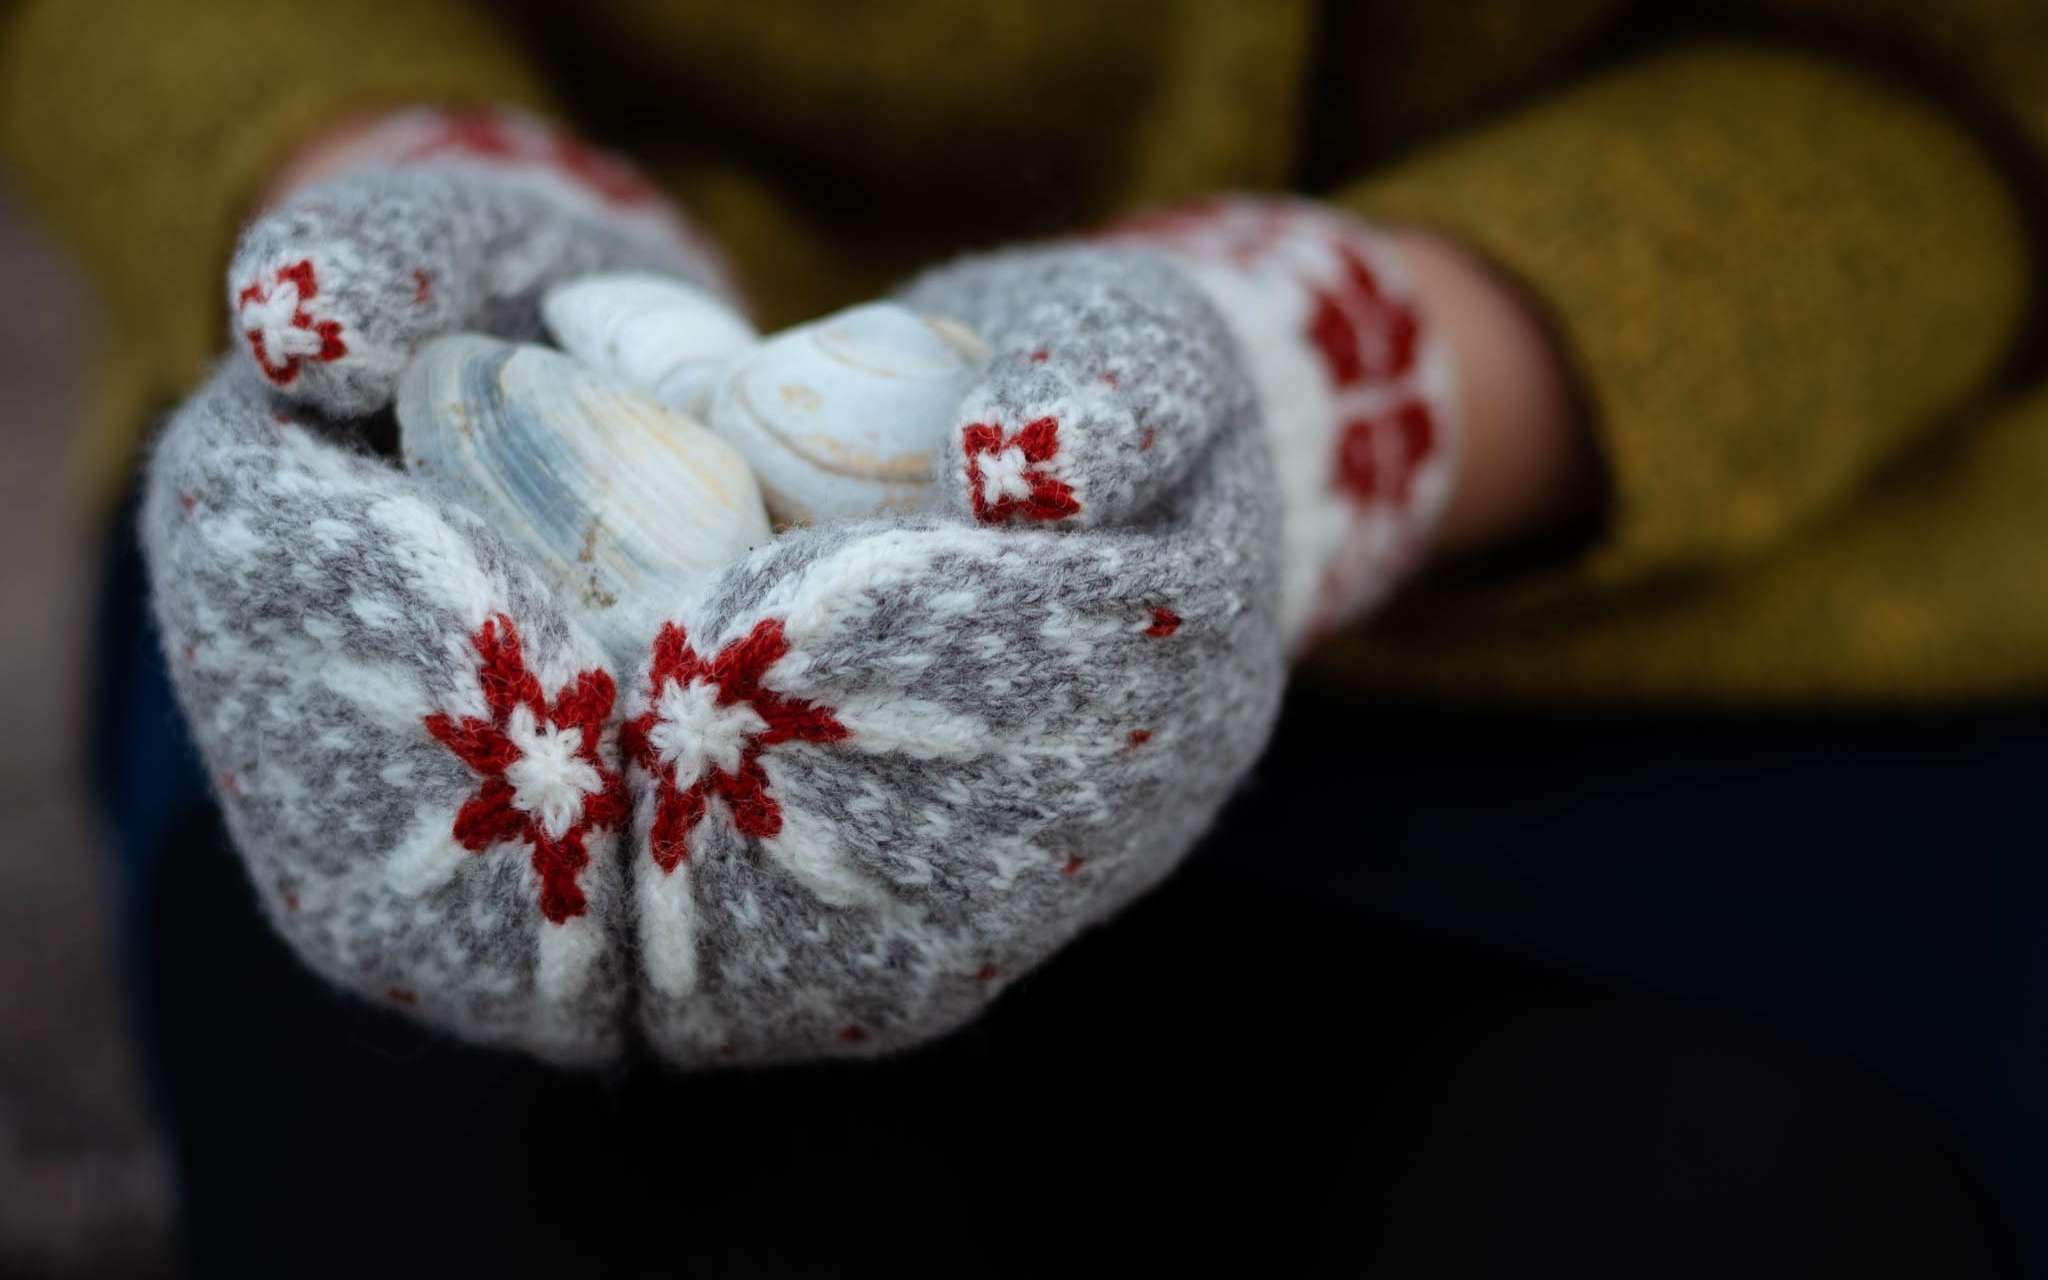 Two hands wearing grey, white and red colourwork mittens are clasped together holding a pale grey stone.